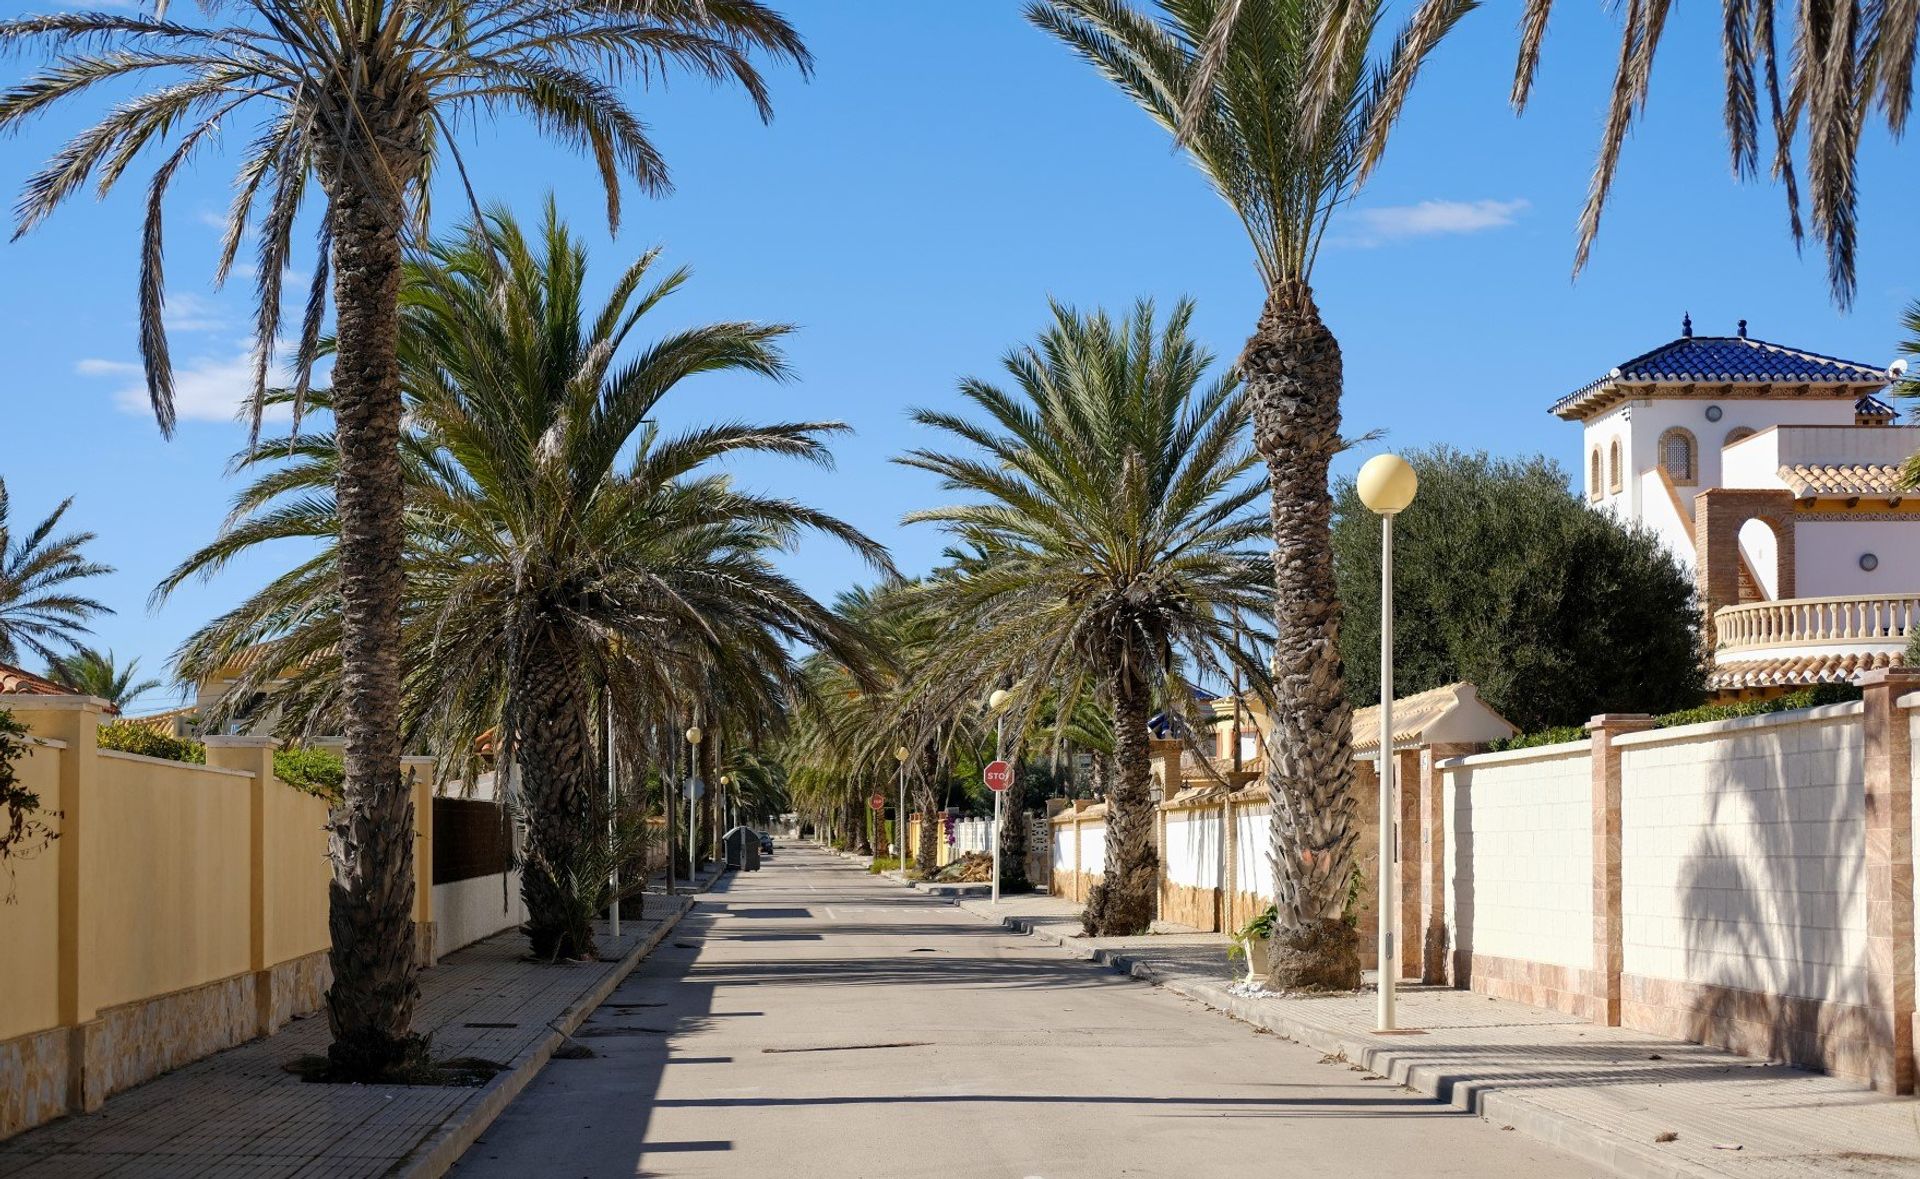 Stroll down palm-lined avenues caressed by the Mediterranean sun